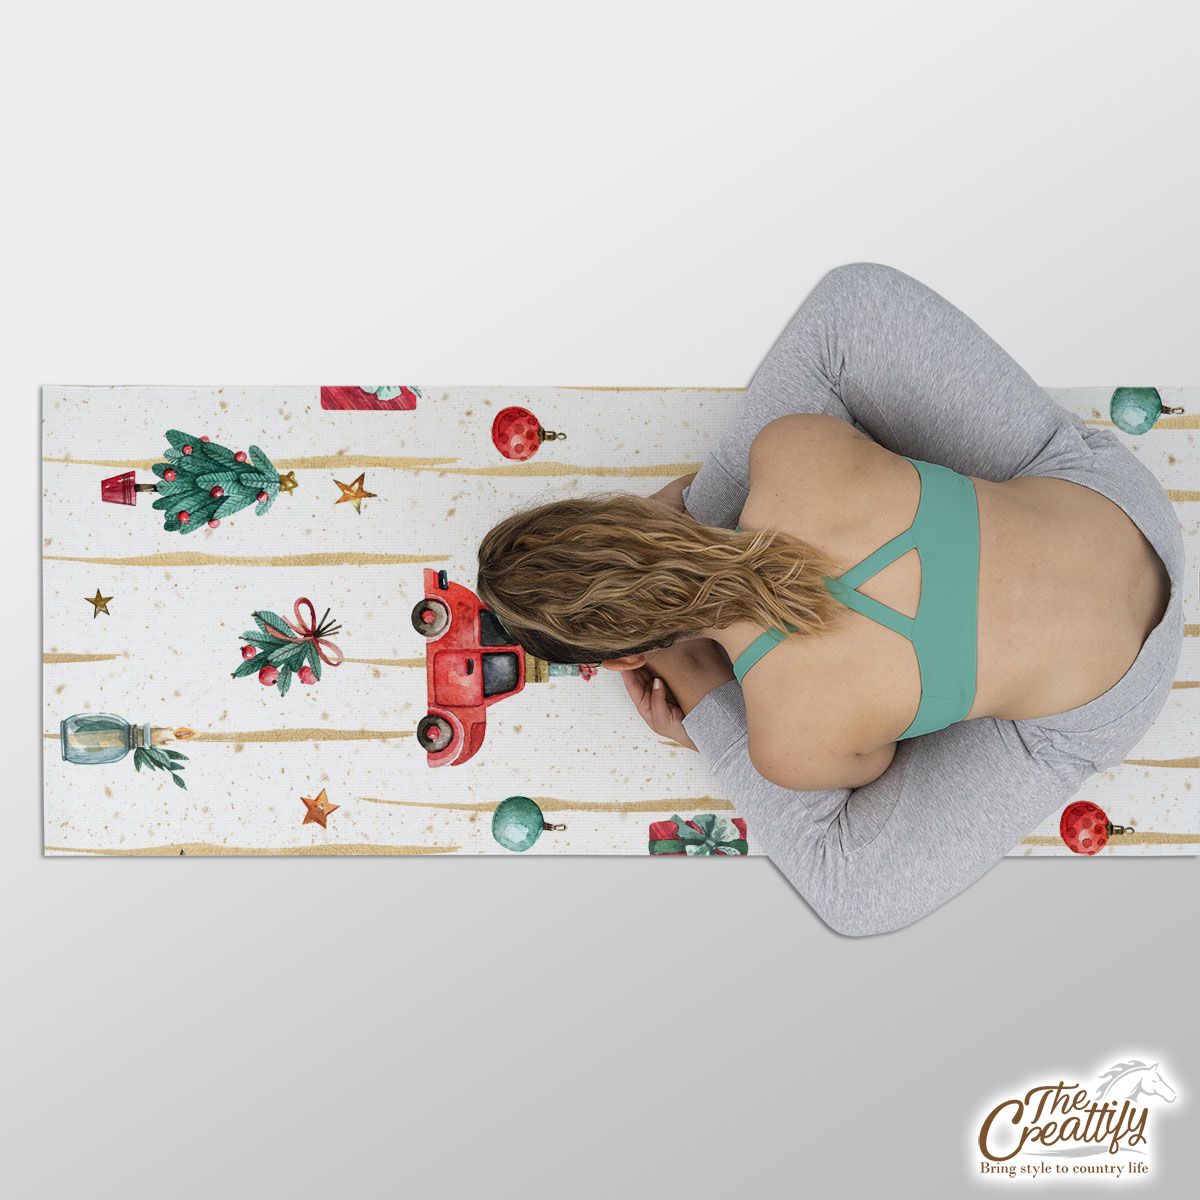 Watercolor Christmas Car With Christmas Gifts, Balls, Wreath And Star Pattern Yoga Mat